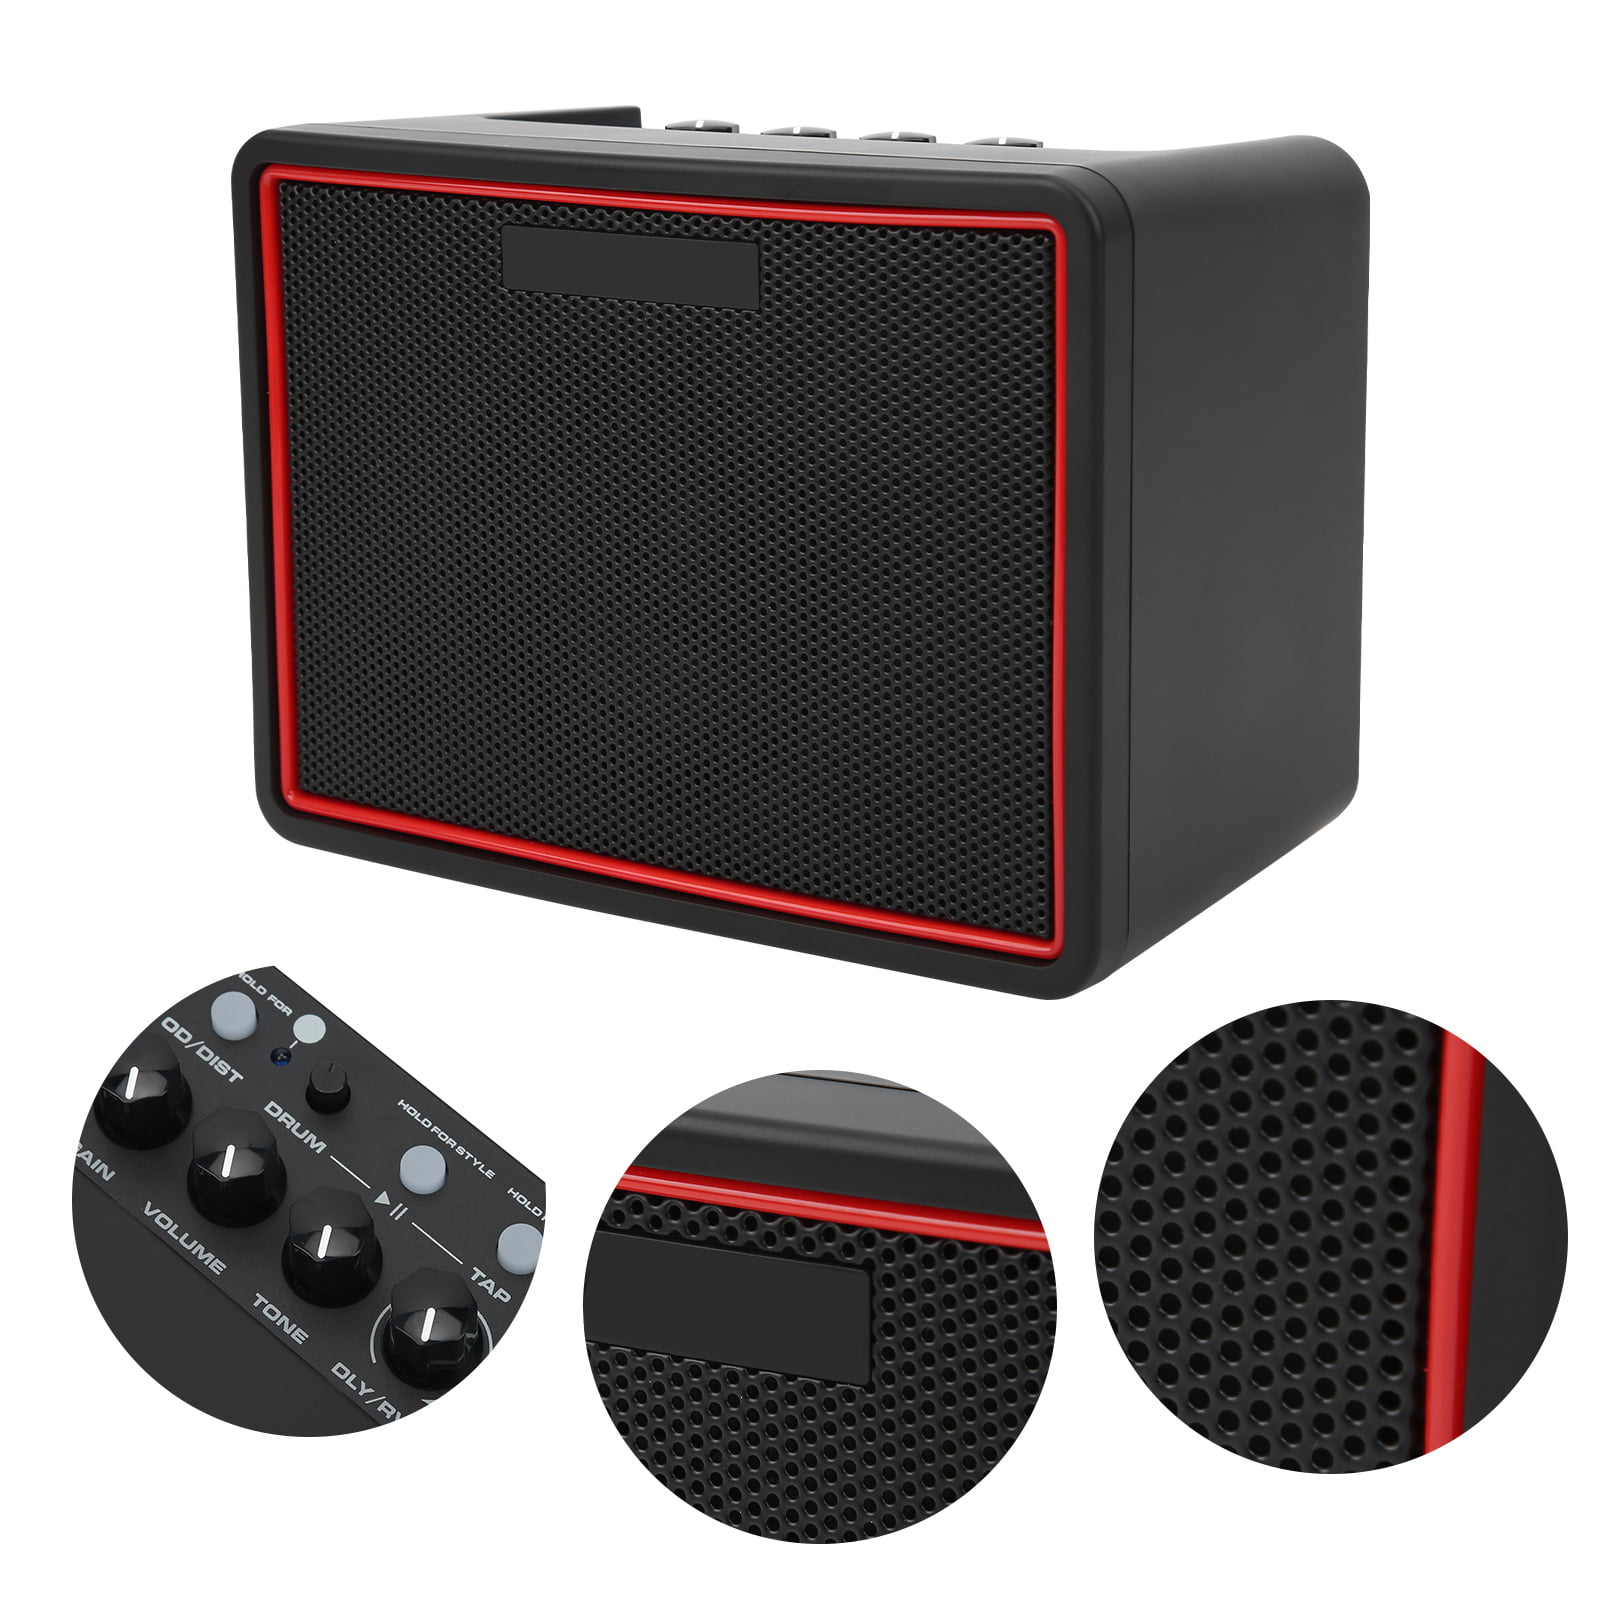 NUX Electric Guitar Amplifier 3W 110‑240V Mini Portable Bluetooth Speaker MIGHTY LITE BT 4.2 Version Bluetooth Suitable for Indoor and Outdoor Use US Plug 